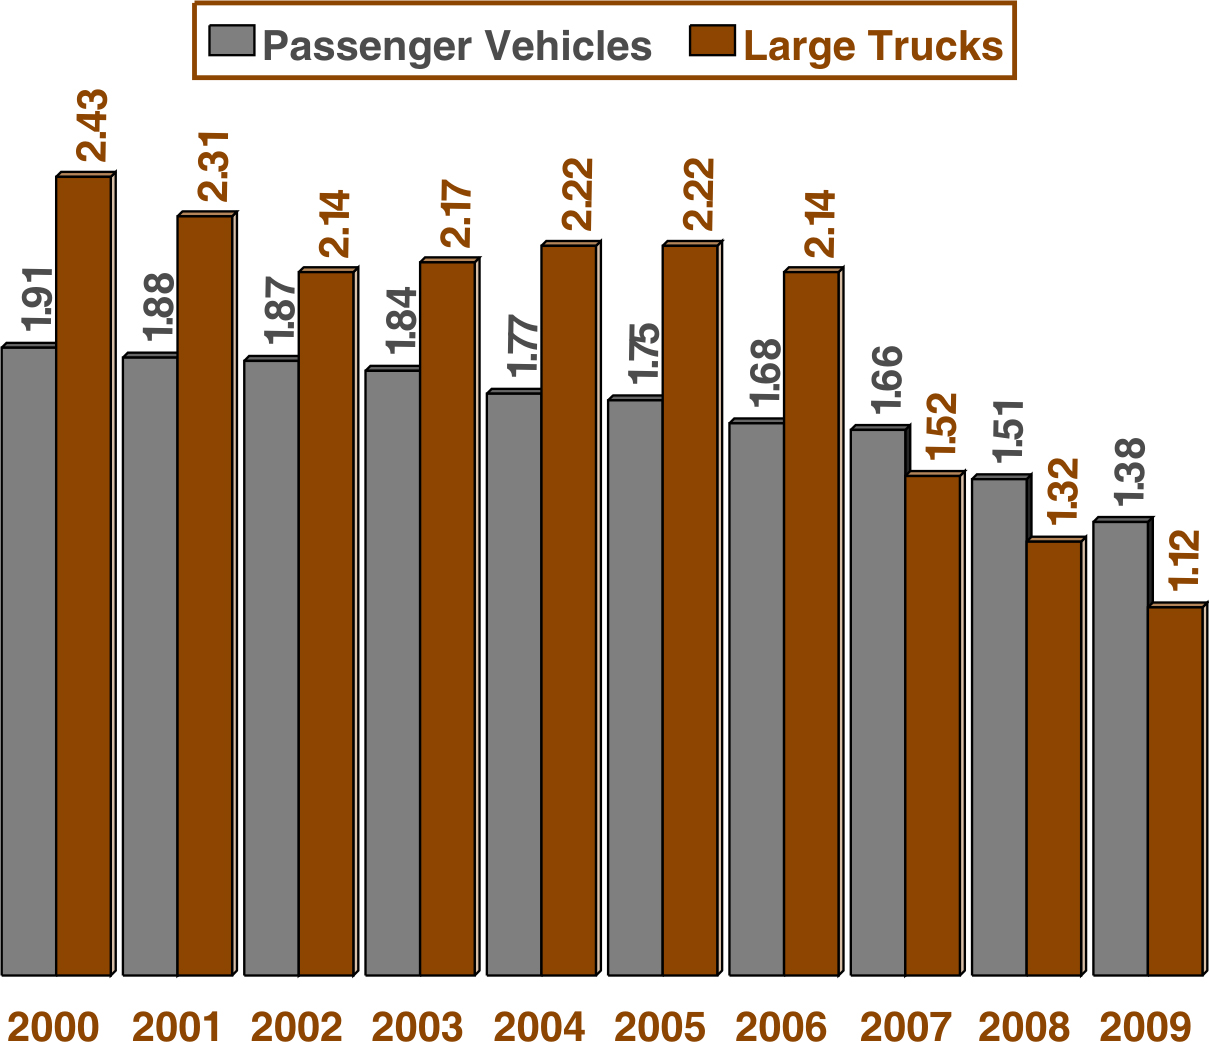 Bar Chart: Large trucks and passenger vehicles involved in fatal crashes, 2000 through 2009. 
Data for large trucks: 
2000=2.43, 
2001=2.31, 
2002=2.14, 
2003=2.17, 
2004=2.22, 
2005=2.22, 
2006=2.14, 
2007=1.52,
2008=1.32,
2009=1.12. 
Data for passenger vehicles: 
2000=1.91, 
2001=1.88, 
2002=1.87, 
2003=1.84, 
2004=1.77, 
2005=1.75, 
2006=1.68
2007=1.66
2008=1.51
2009=1.38.